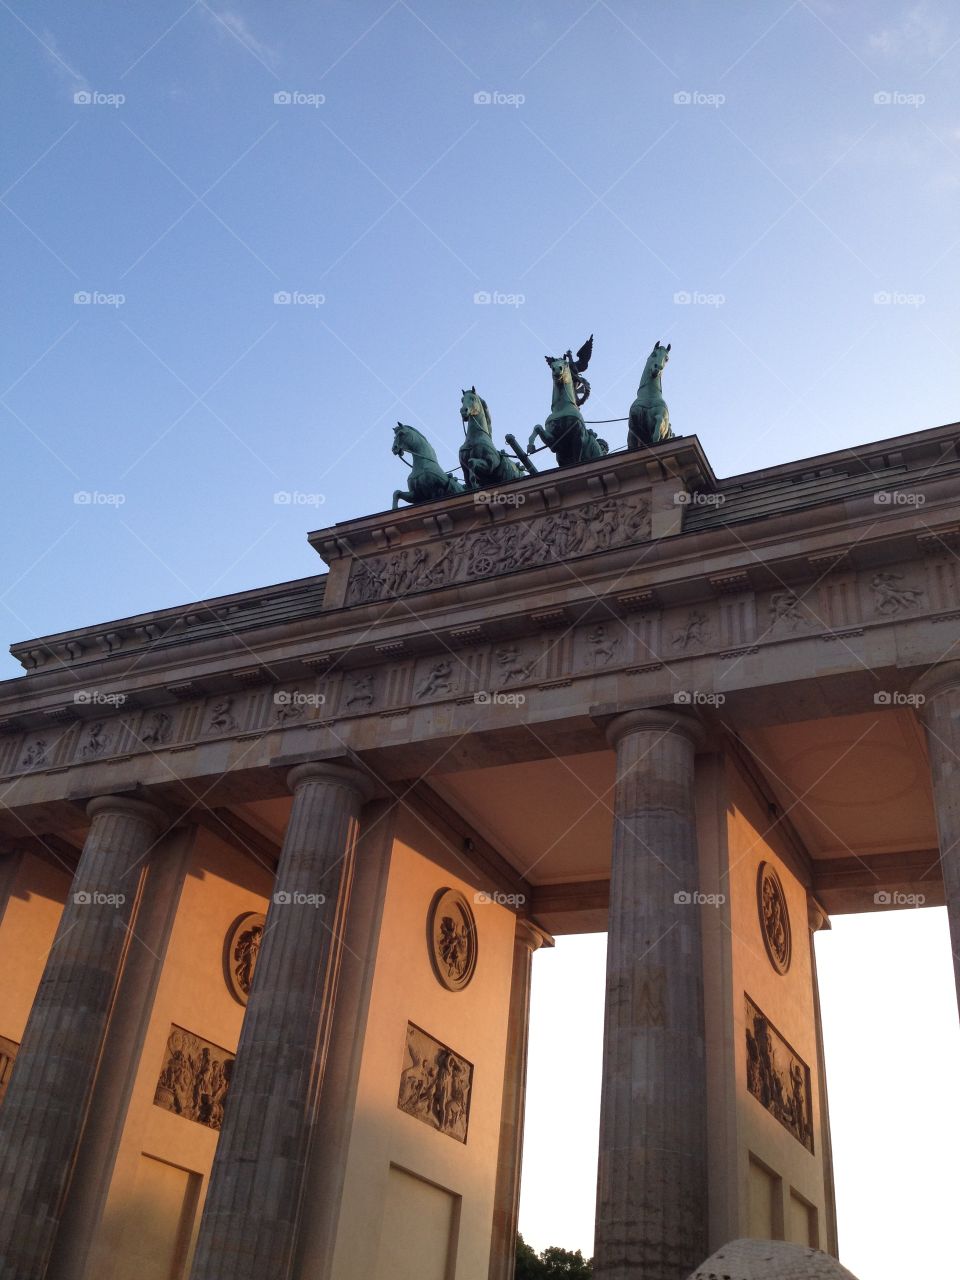 I put my horses on a pedestal. Berlin monument figuring horses on a beautiful pedestal.